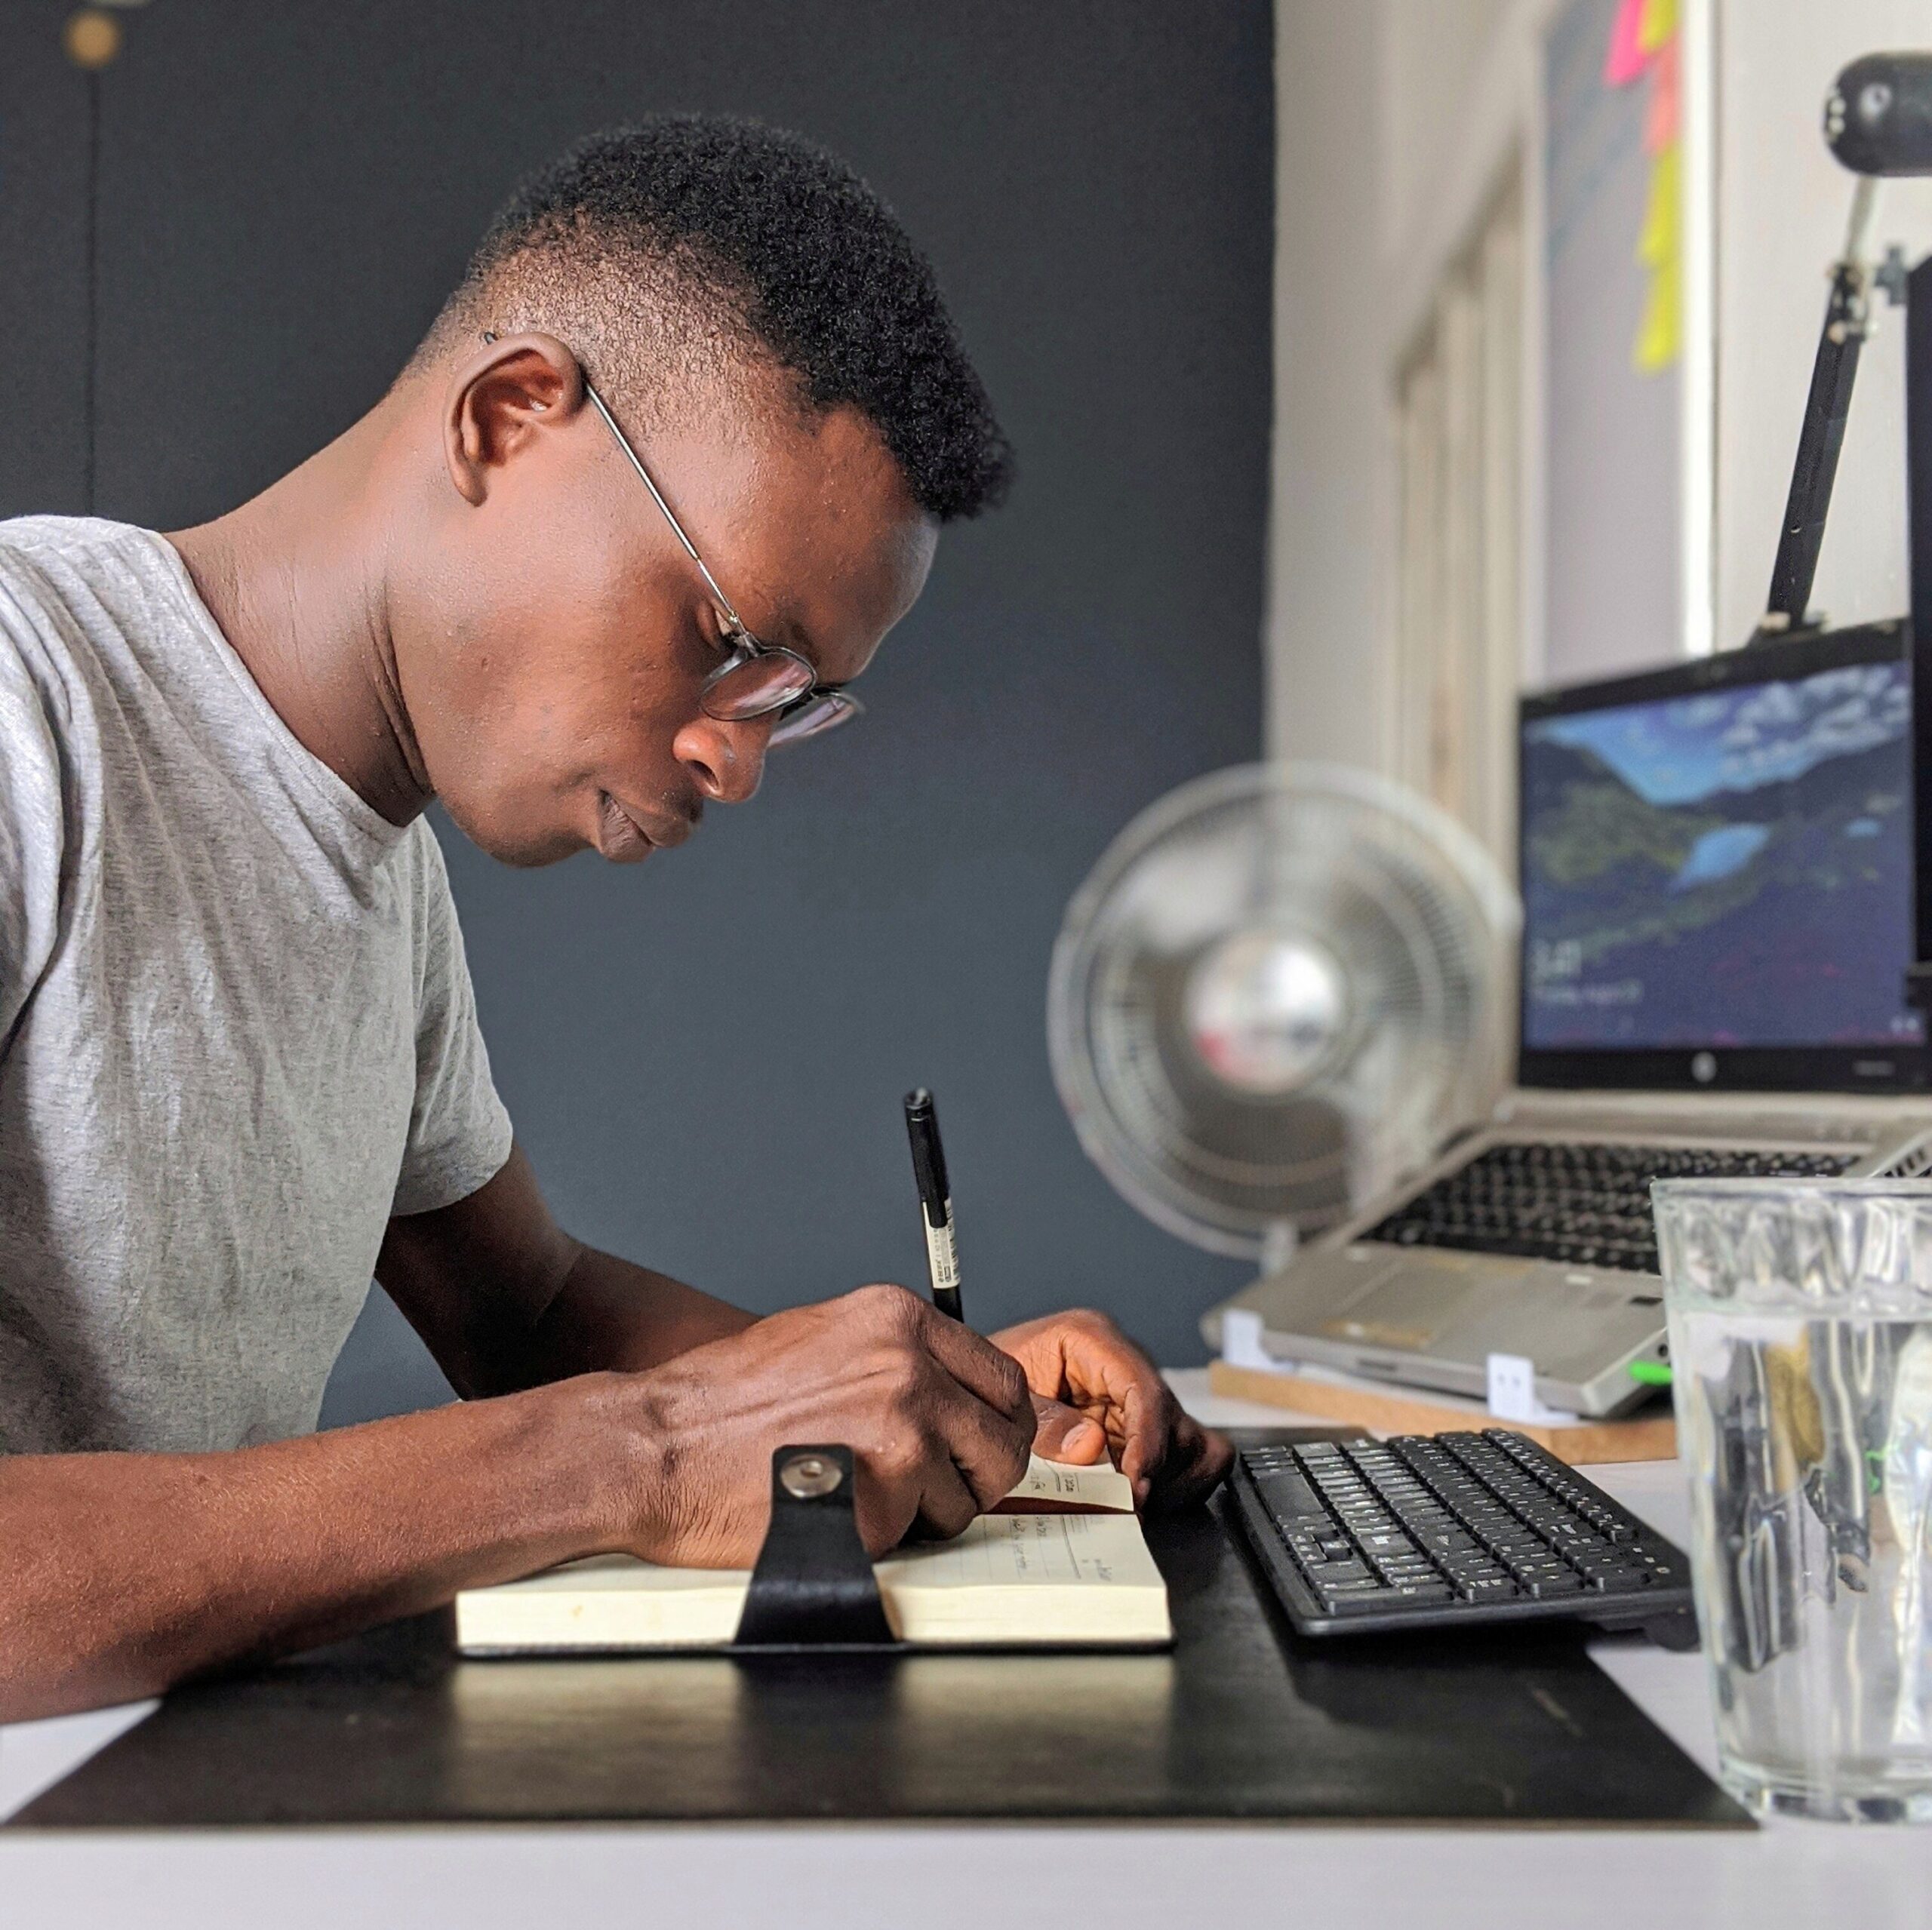 How much does a graphic designer in Kenya Earn? Young graphic designer